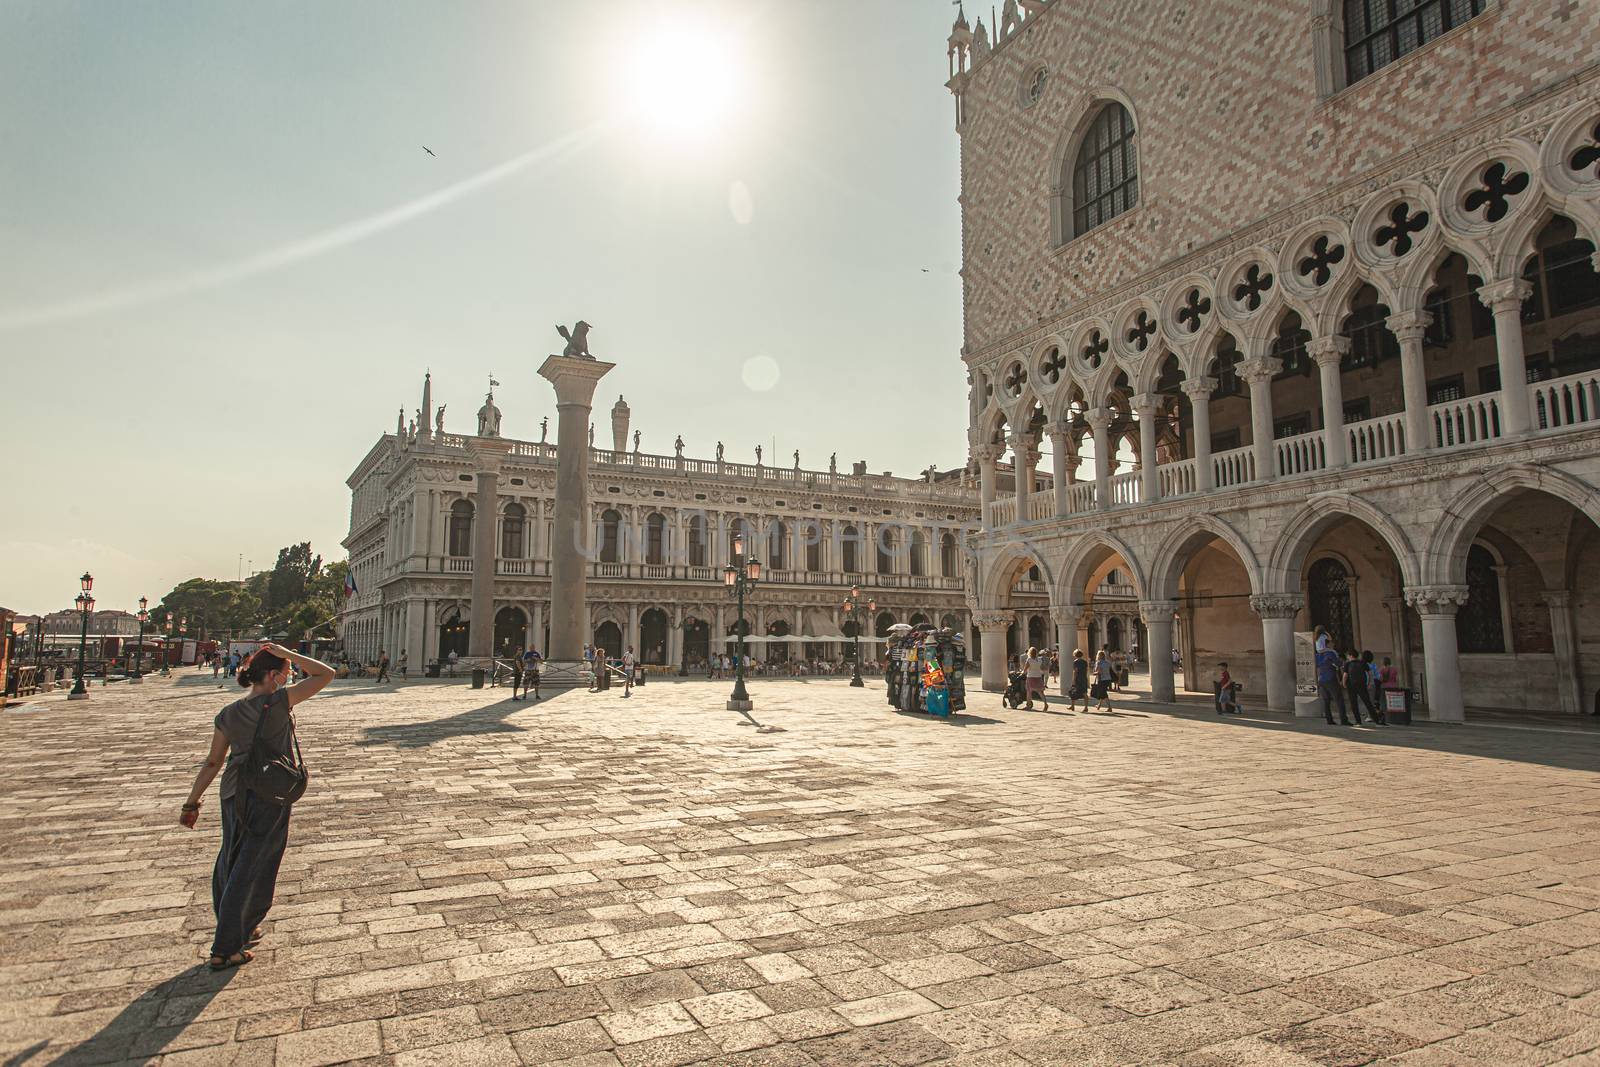 VENICE, ITALY 2 JULY 2020: Saint Mark square in Venice with people walking